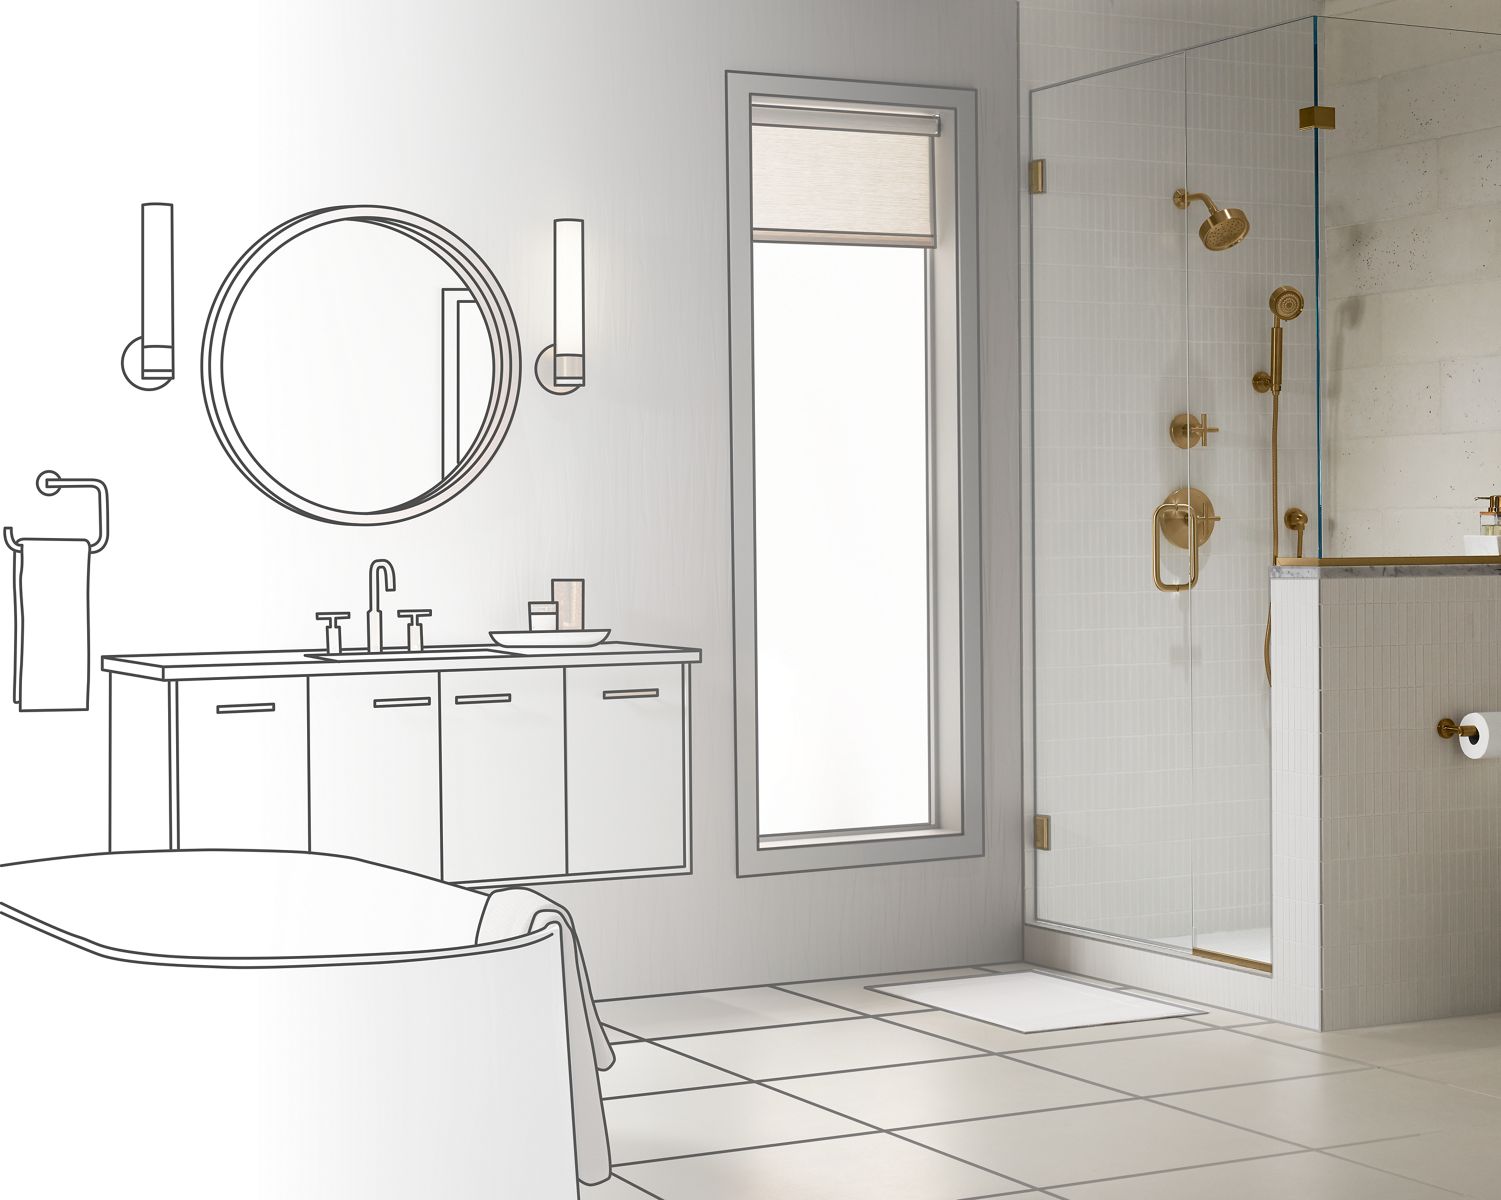 Kohler Toilets Showers Sinks Faucets And More For Bathroom Kitchen